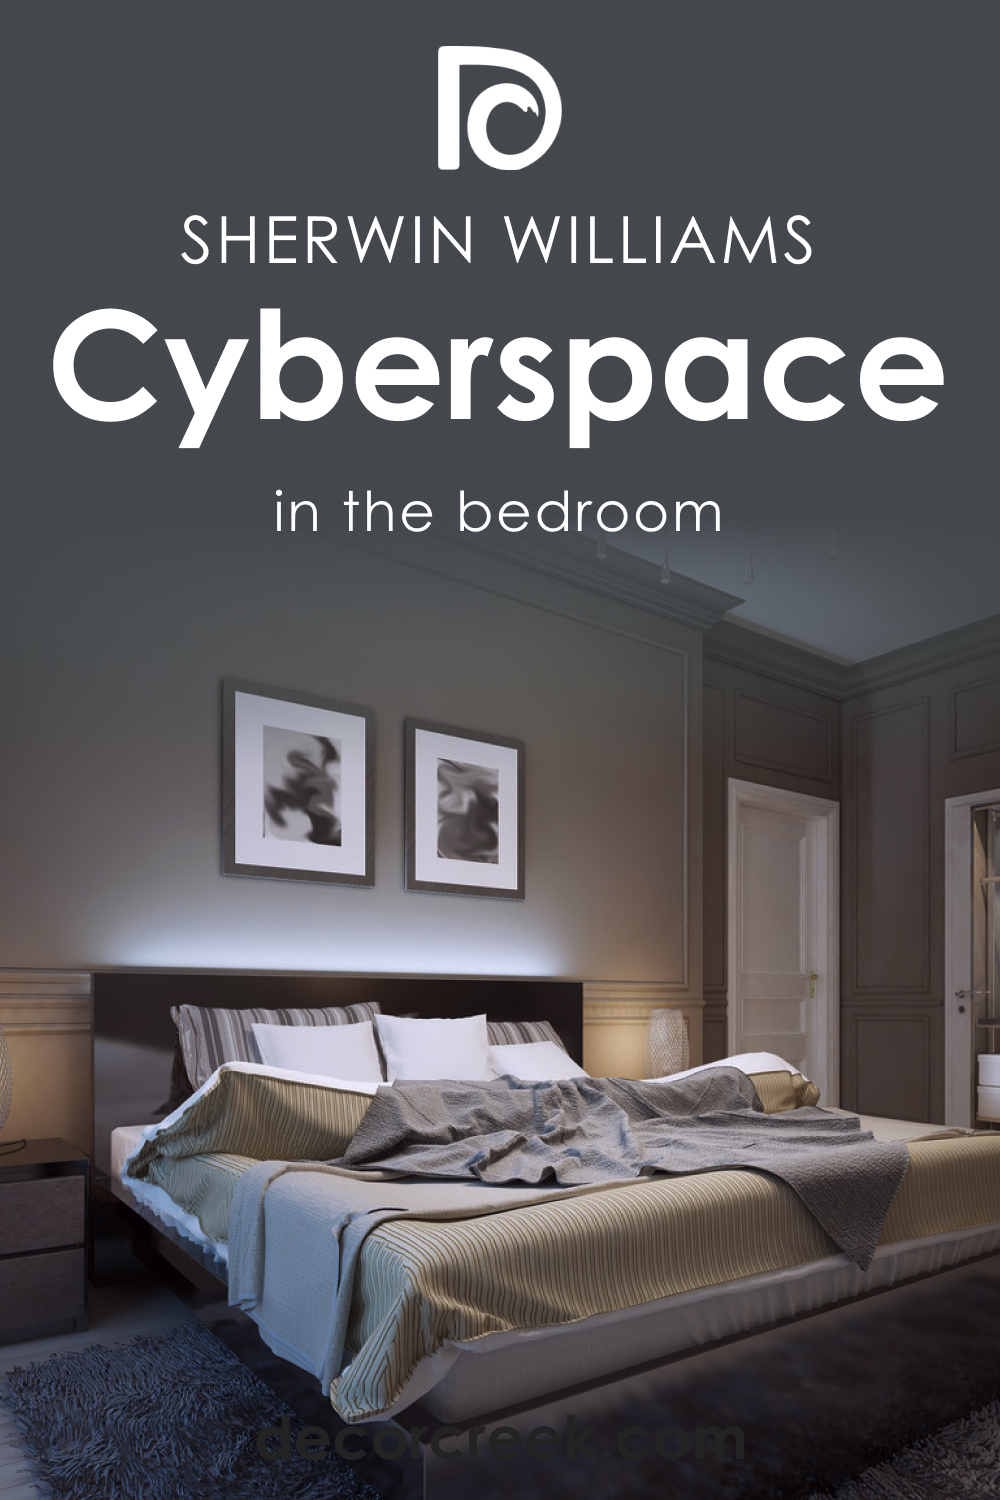 How to Use SW 7076 Cyberspace in the Bedroom?